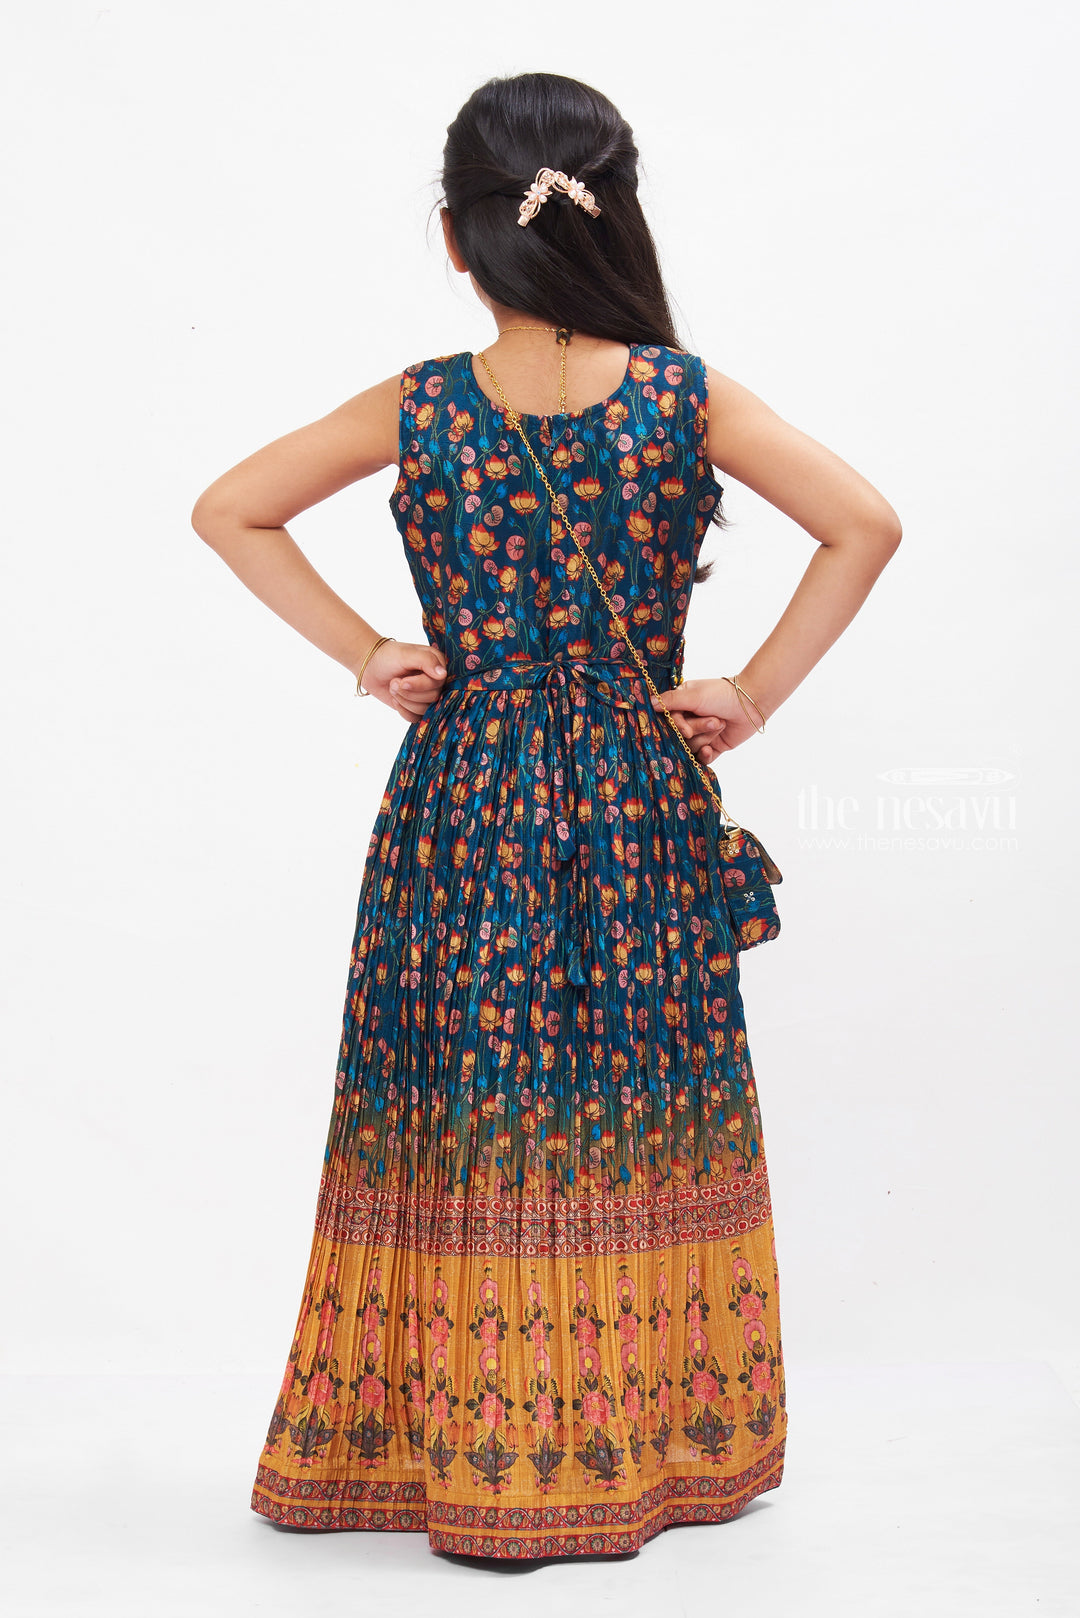 The Nesavu Girls Party Gown Ethnic Floral Fusion Anarkali Dress: Girls Boho-Chic Navy and Mustard Delight Nesavu Girls Navy & Mustard Anarkali Dress | Floral Bohemian Style | The Nesavu